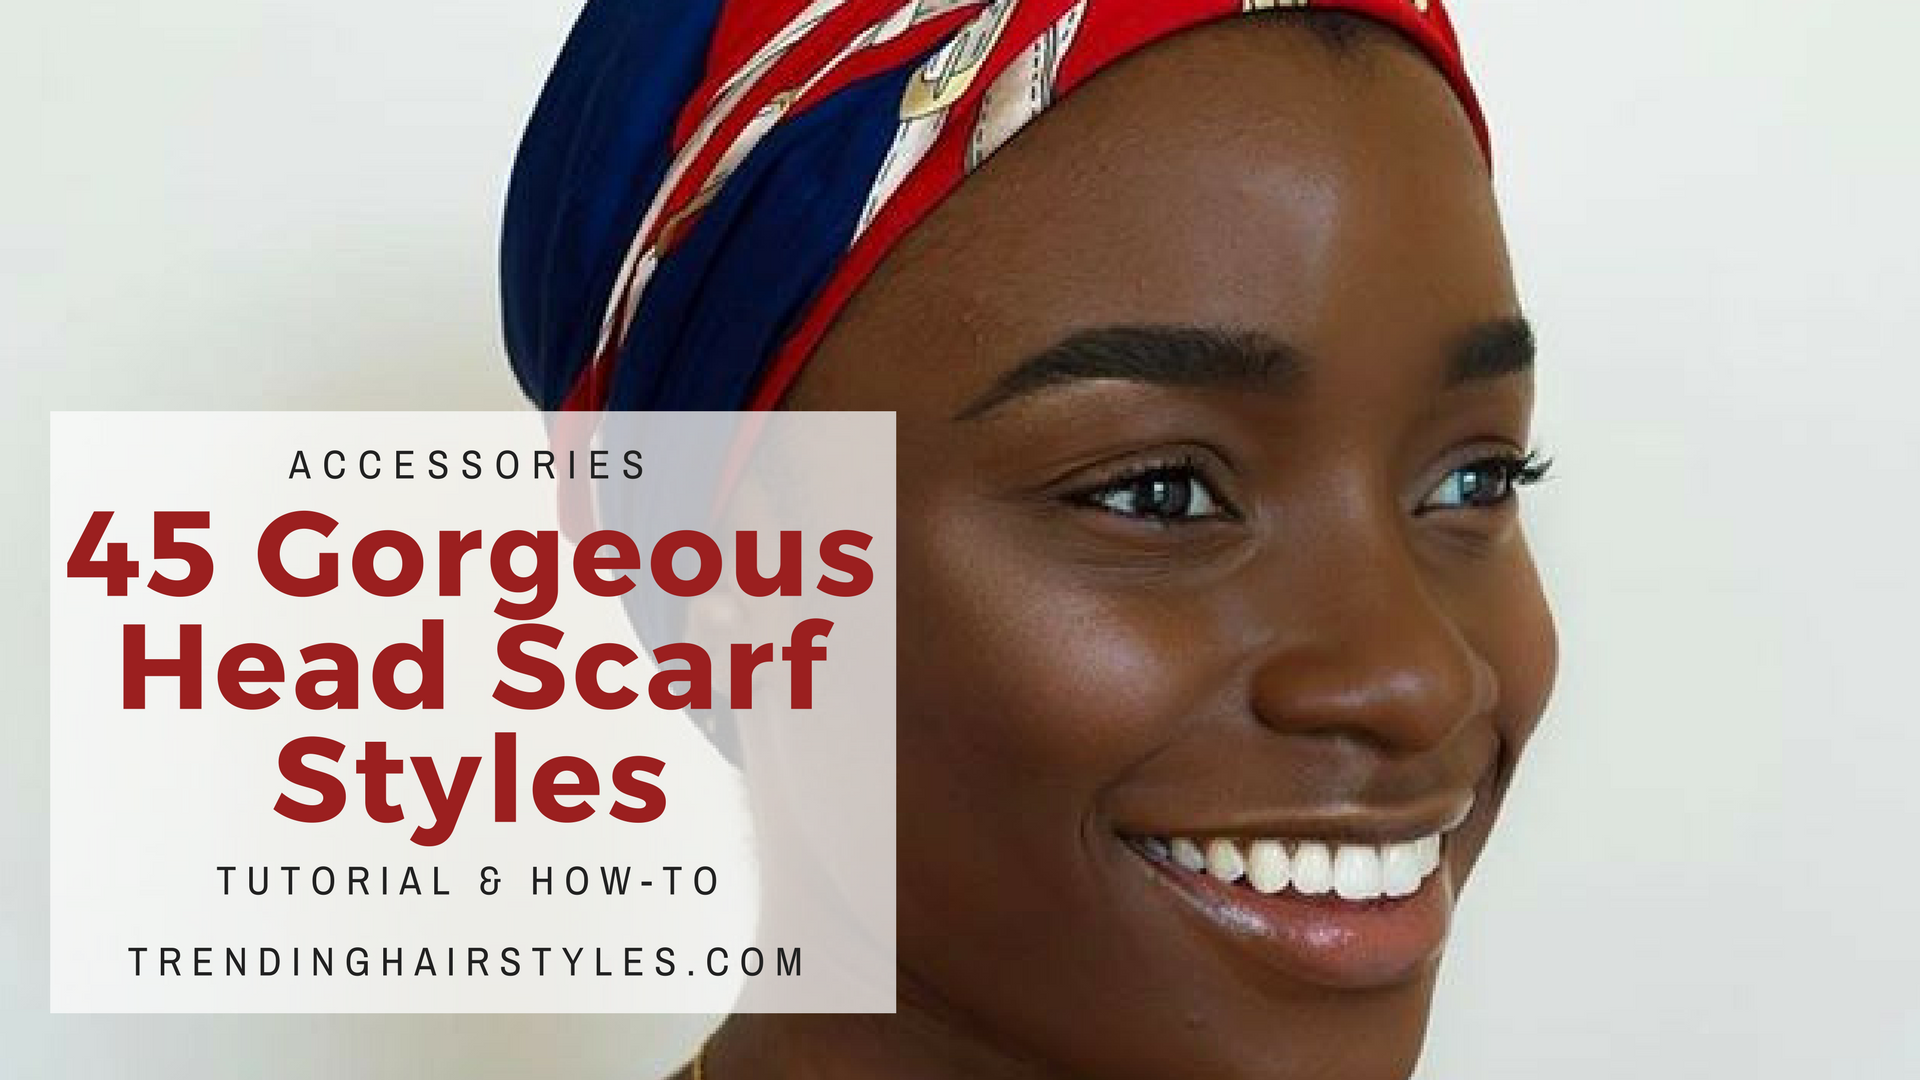 Head Scarf Styles For Black Women w/ How-to Video Tutorials